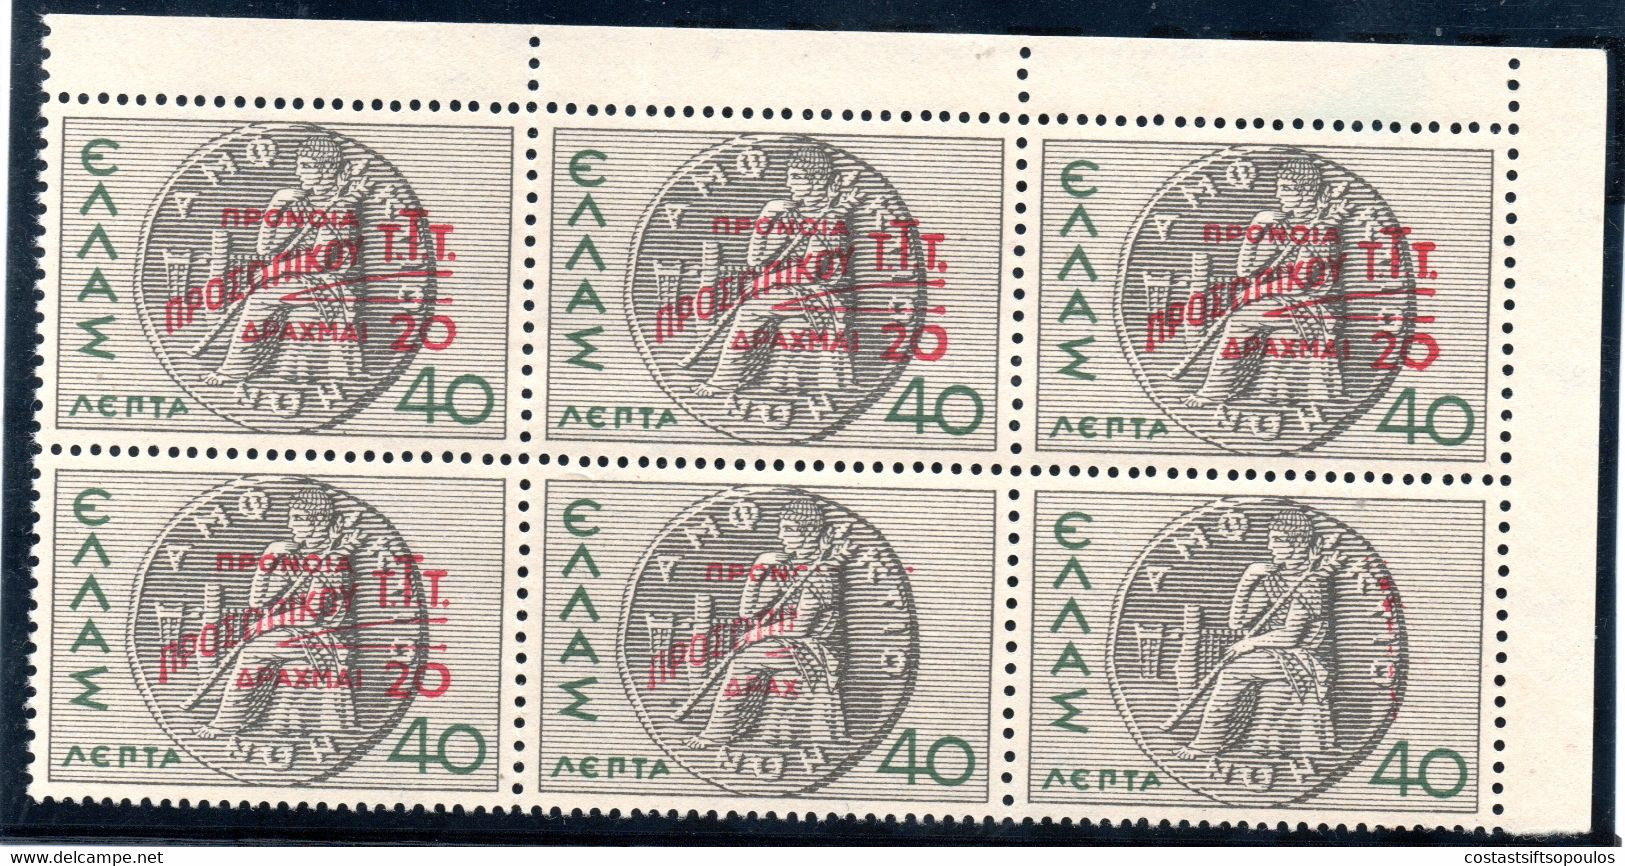 926.GREECE.1946 CHARITY COIN OF AMPHICTYONY HELLAS C96f MNH BLOCK OF 6 ONE WITHOUT OVERPR.VERY SCARCE - Variedades Y Curiosidades